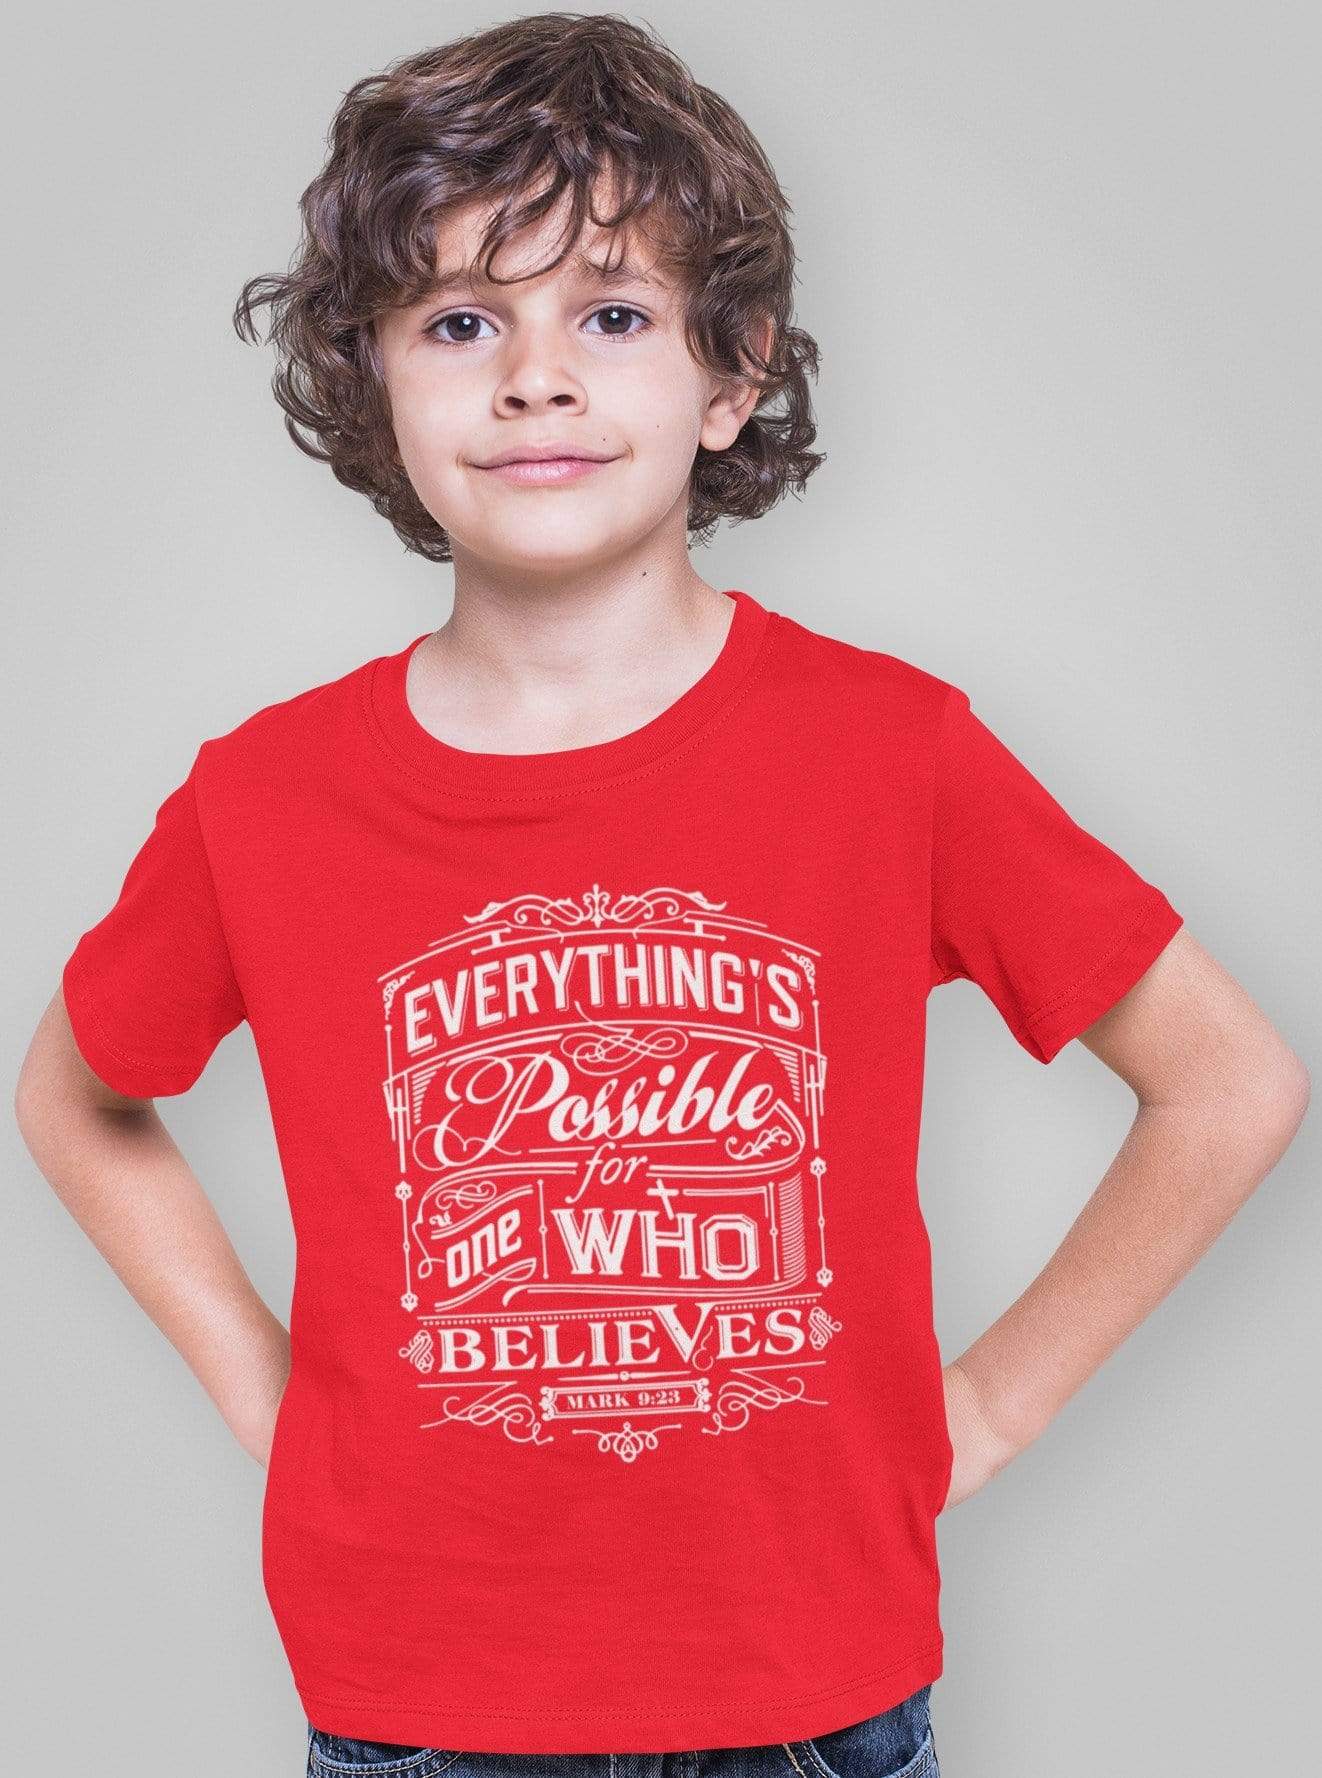 Living Words Kids Round Neck T Shirt Boy / 0-12 Mn / Red Everything possible